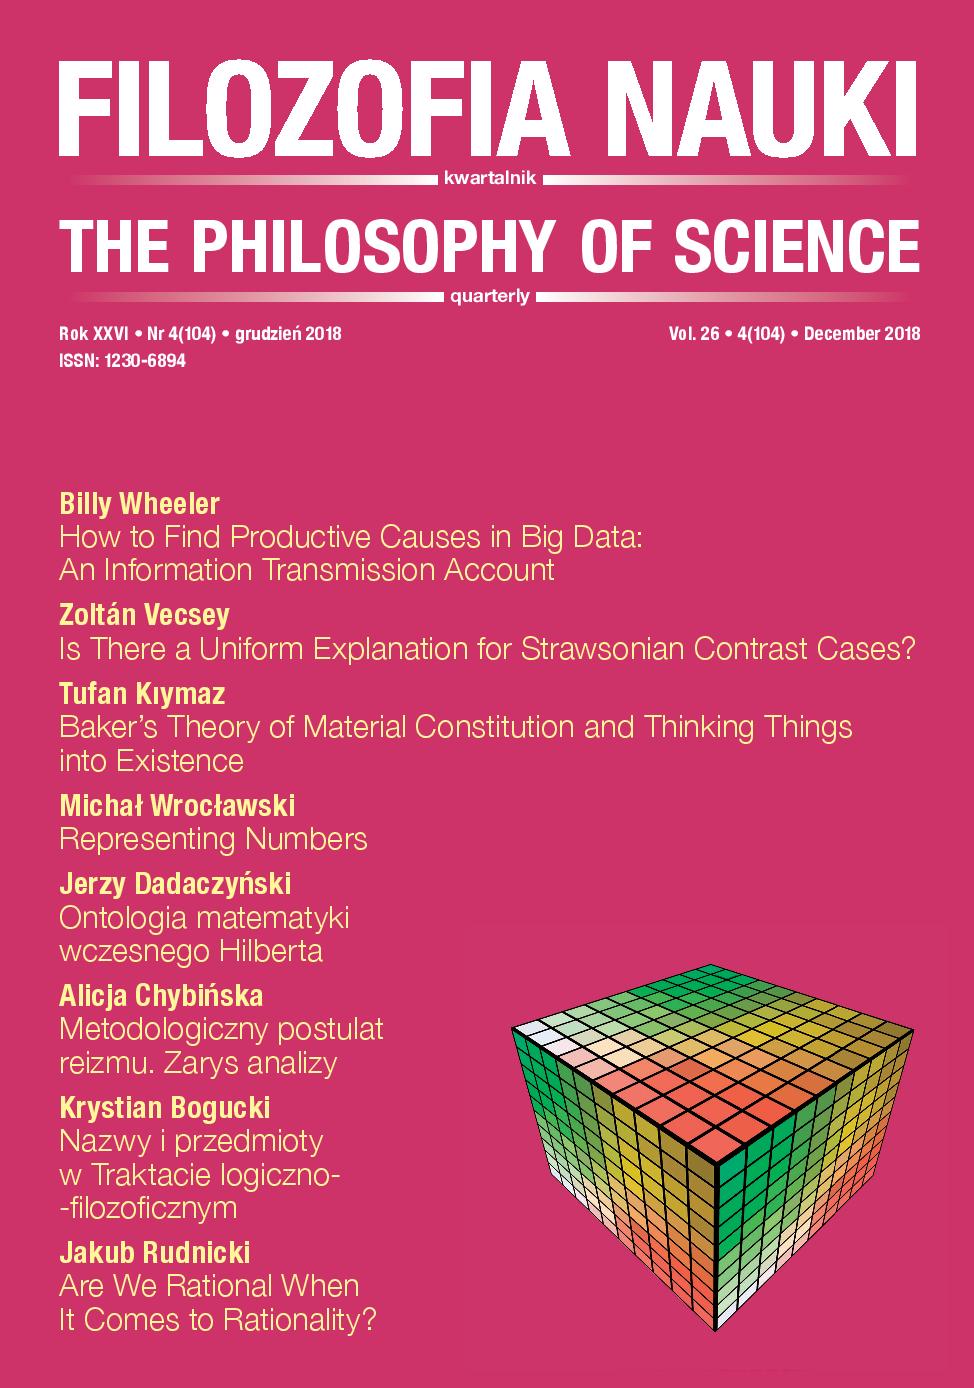 					View Vol. 26 No. 4 (2018): THE PHILOSOPHY OF SCIENCE
				